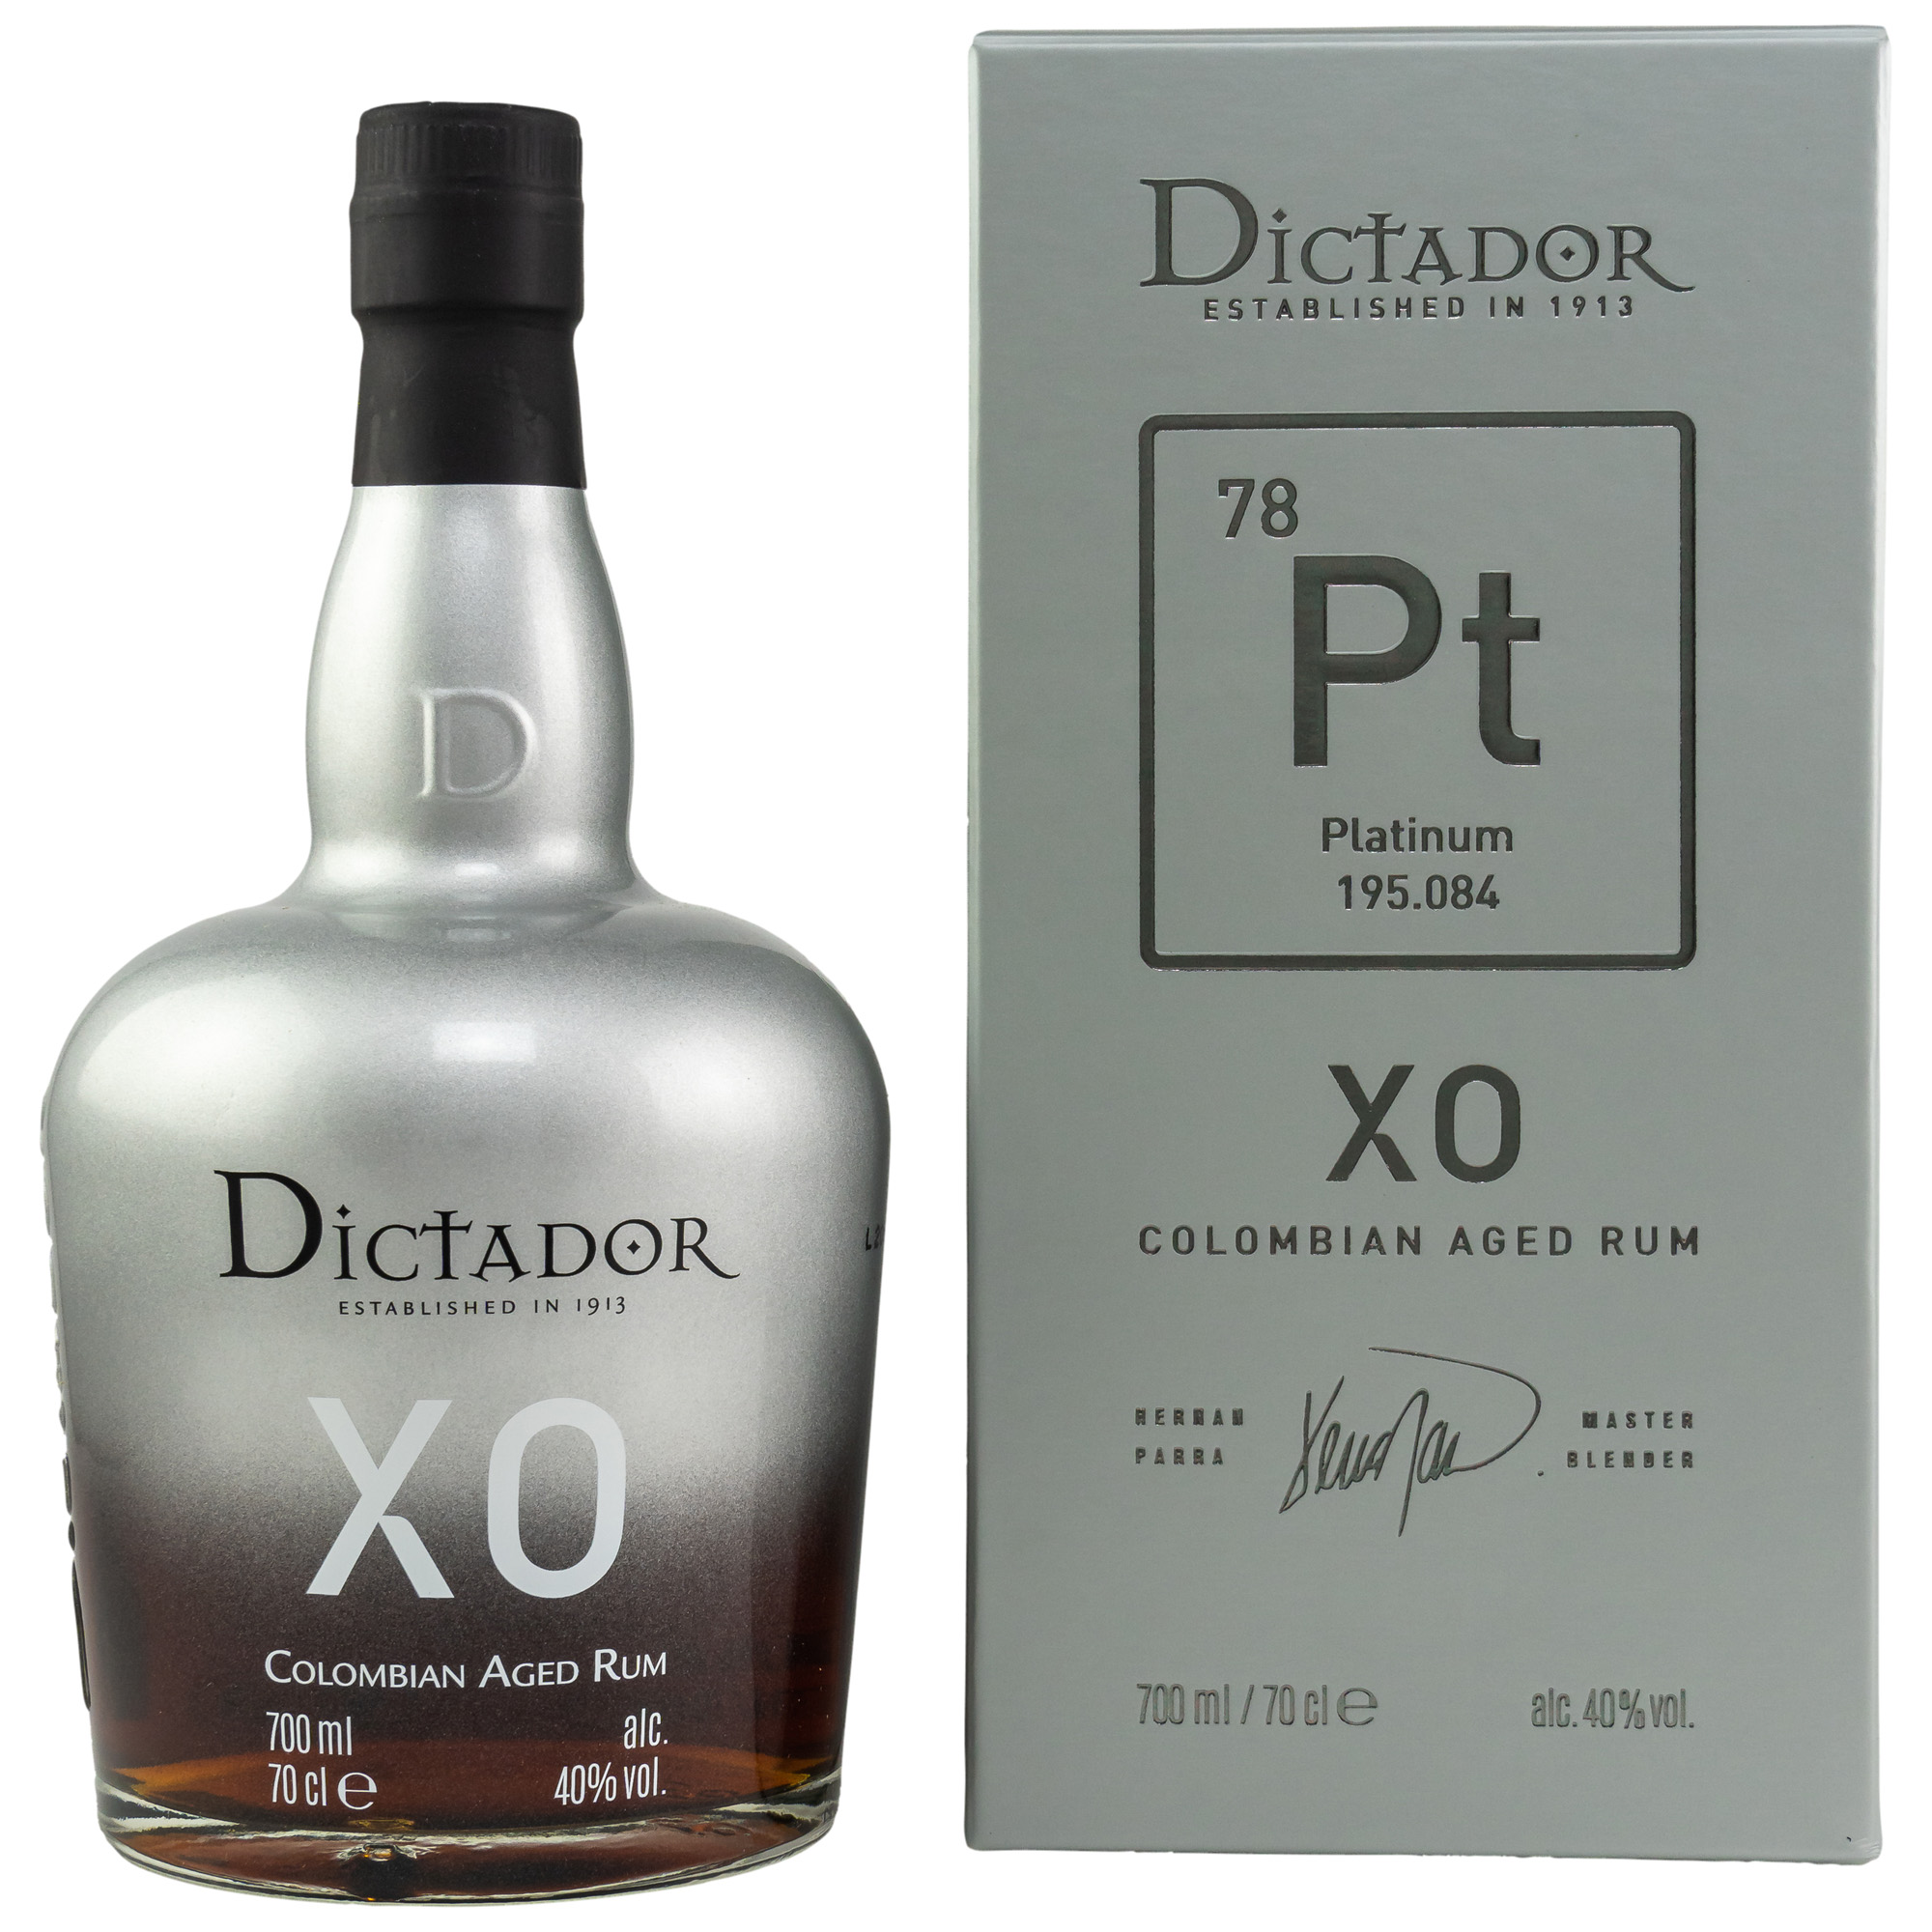 Dictador XO Insolent Colombian Aged Rum in Geschenkpackung, 40% Vol. 0,7 ltr.